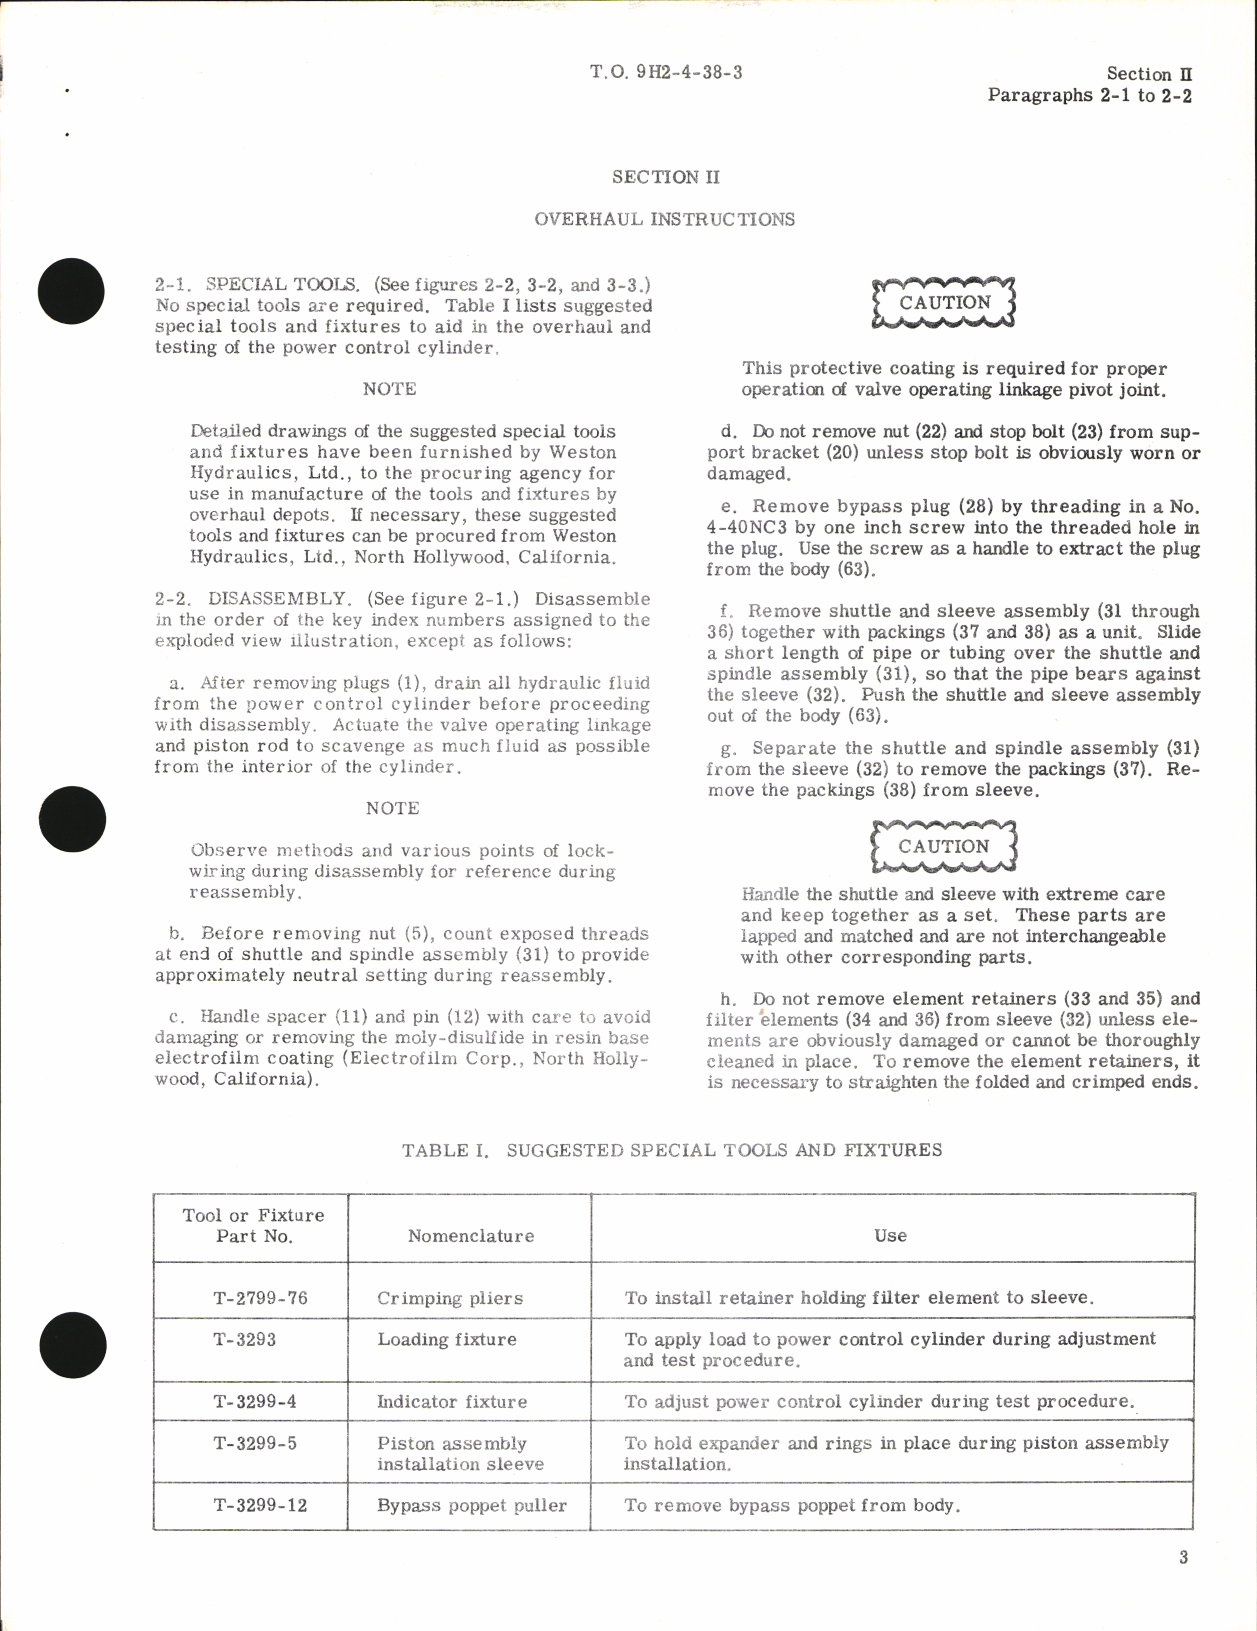 Sample page 5 from AirCorps Library document: Overhaul Instructions for Single Servo Power Control Cylinder Part No. 11570-1